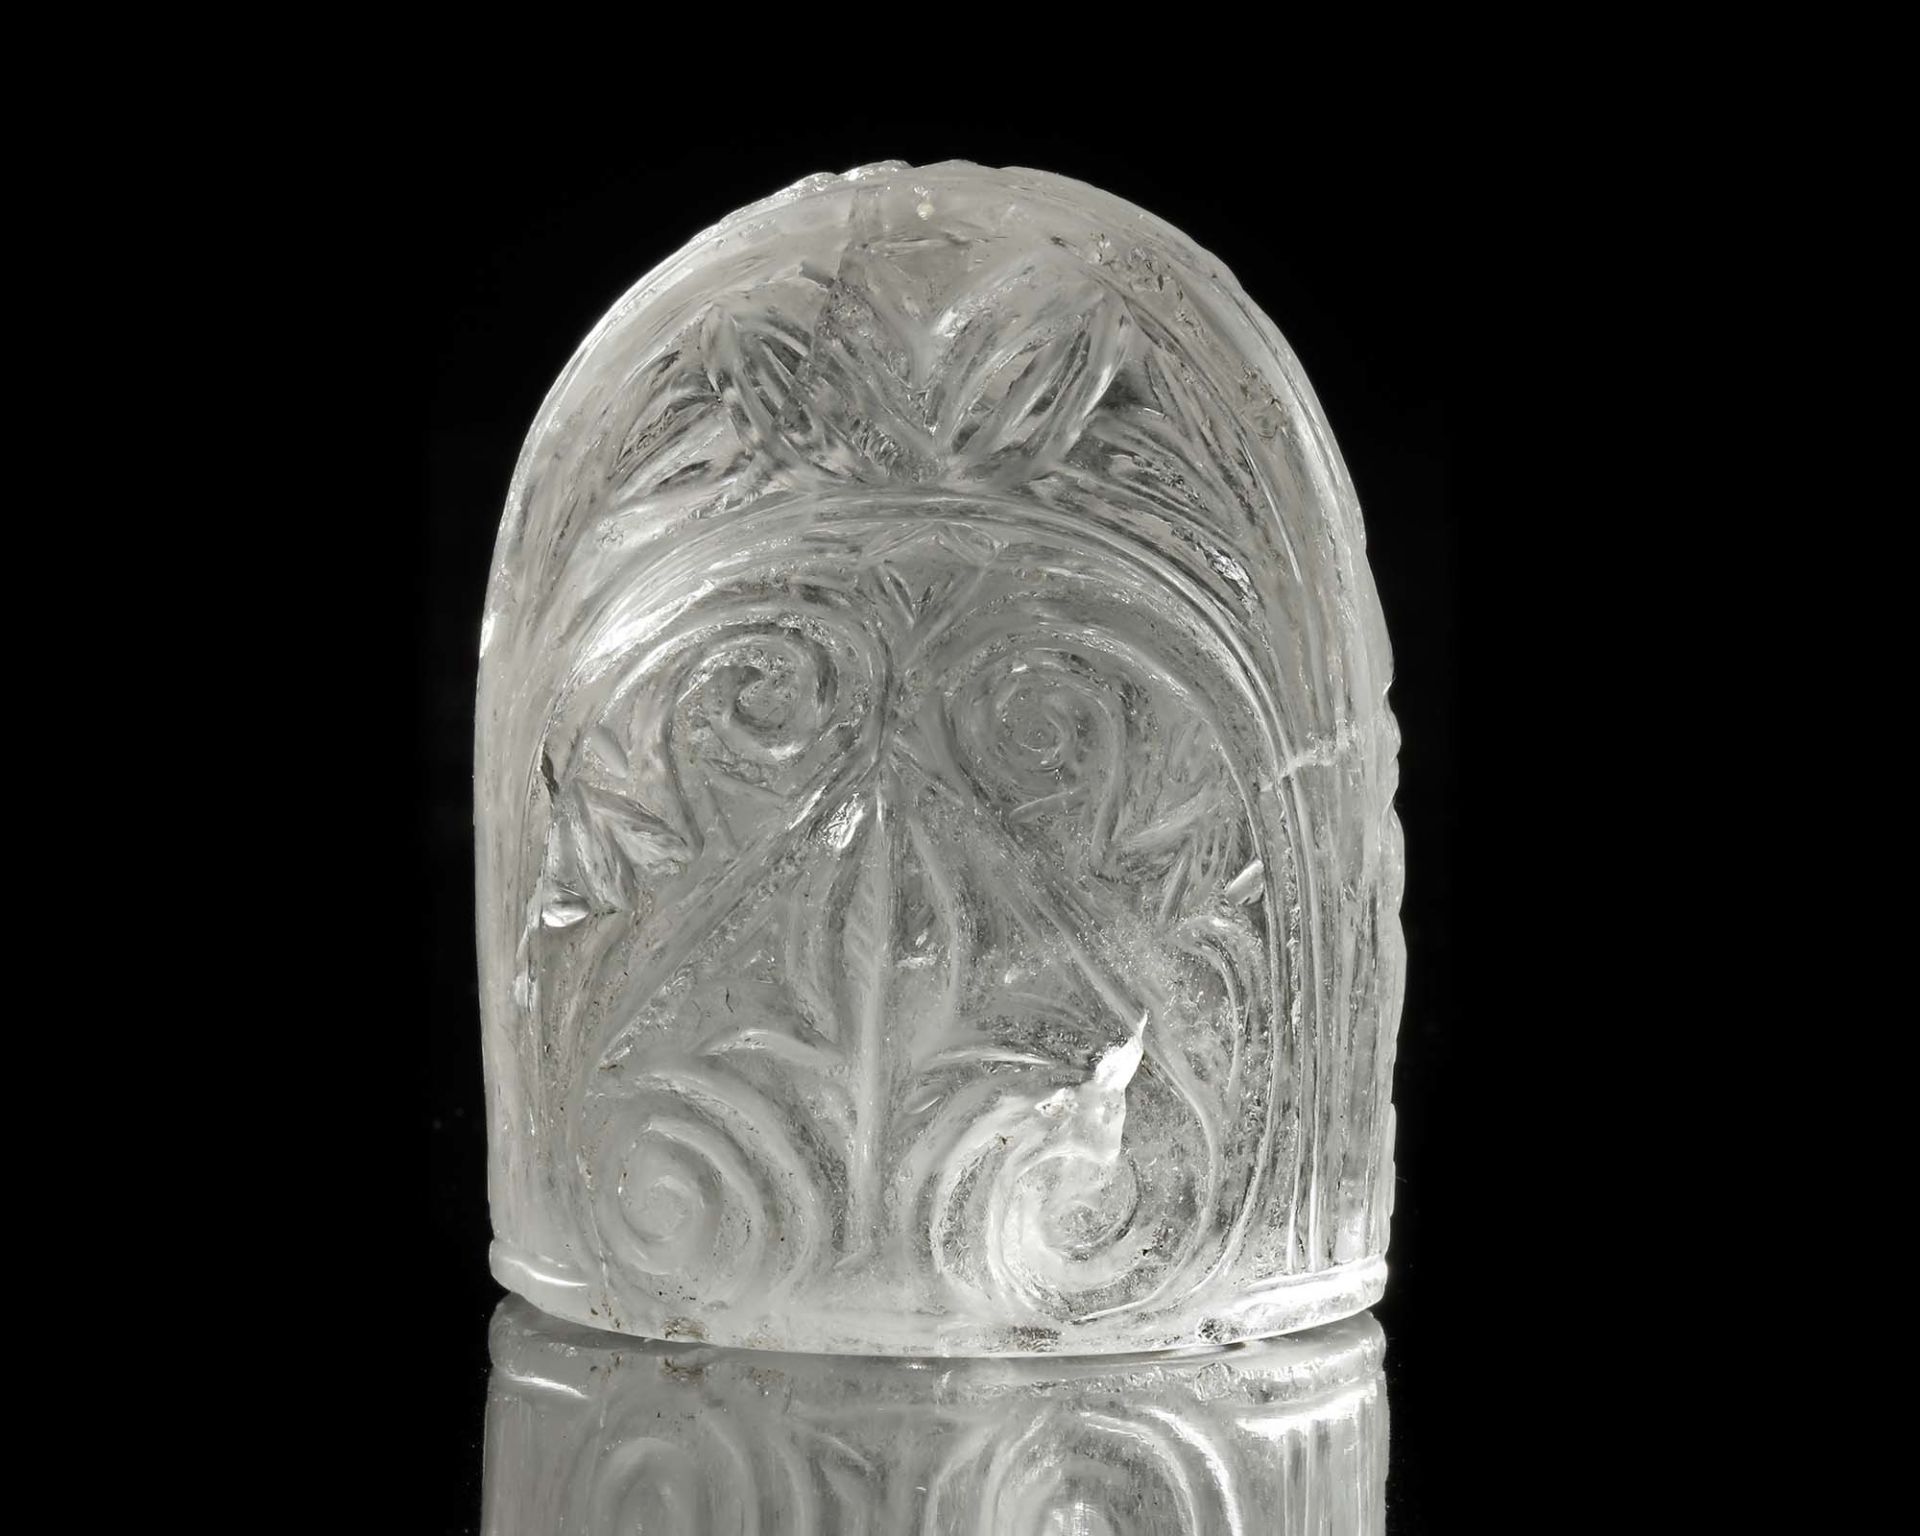 A KING (SHAH) ROCK CRYSTAL CHESS PIECE, IRAQ OR KHORASAN, LATE 9TH-EARLY 10TH CENTURY - Image 9 of 14